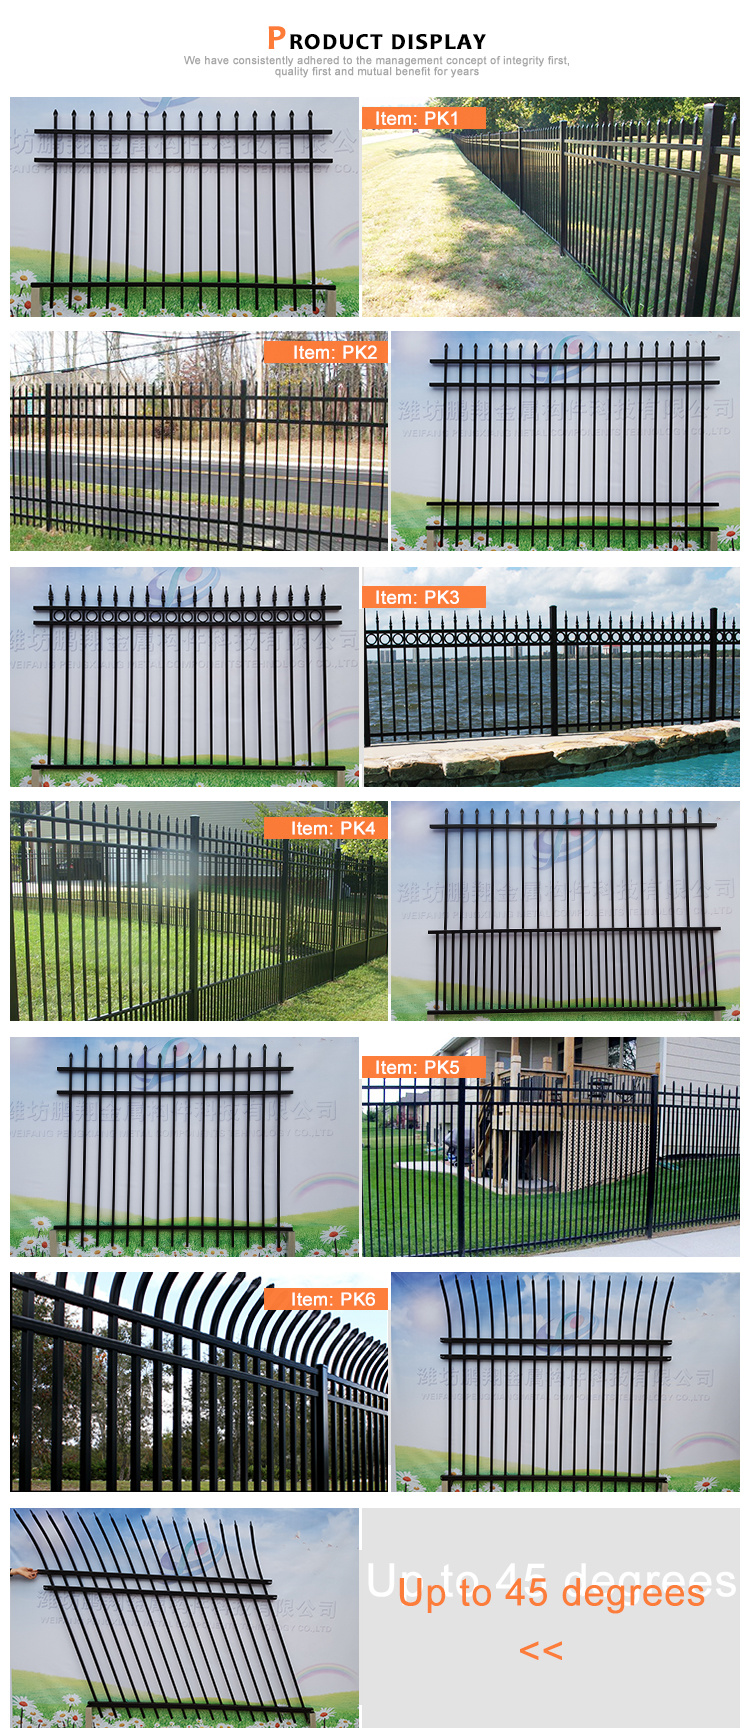 Welded Spear Aluminum Picket Fence Steel Removable High Picket Fence